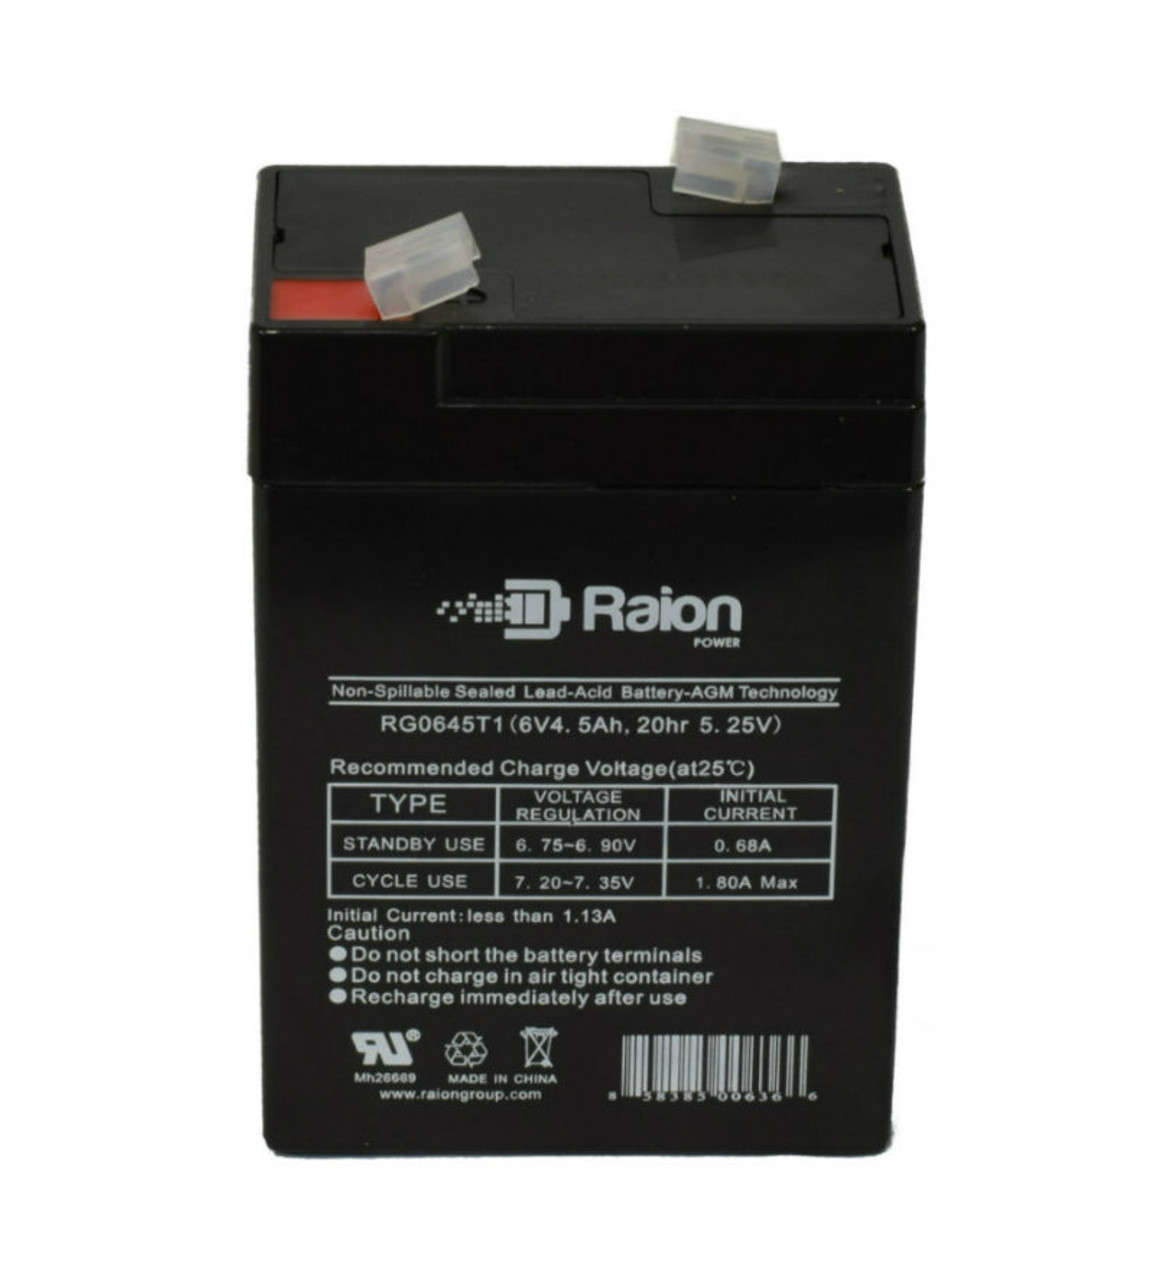 Raion Power RG0645T1 Replacement Battery Cartridge for National Power Corporation GS012P3LL